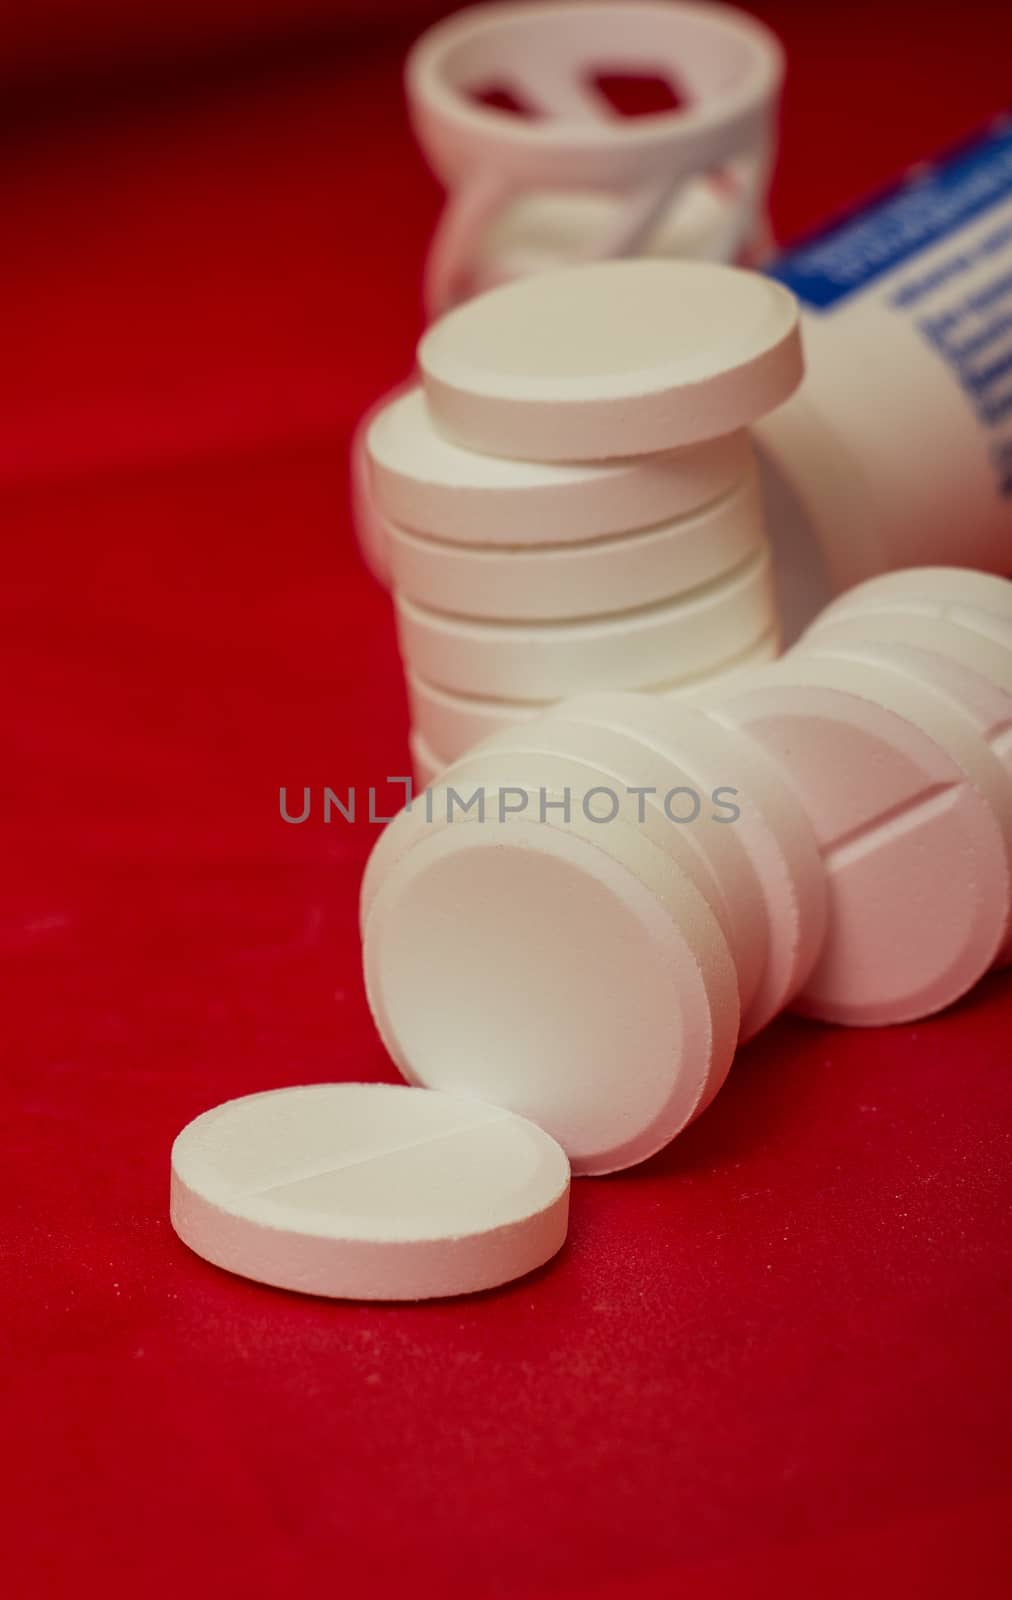 white pills on a red background